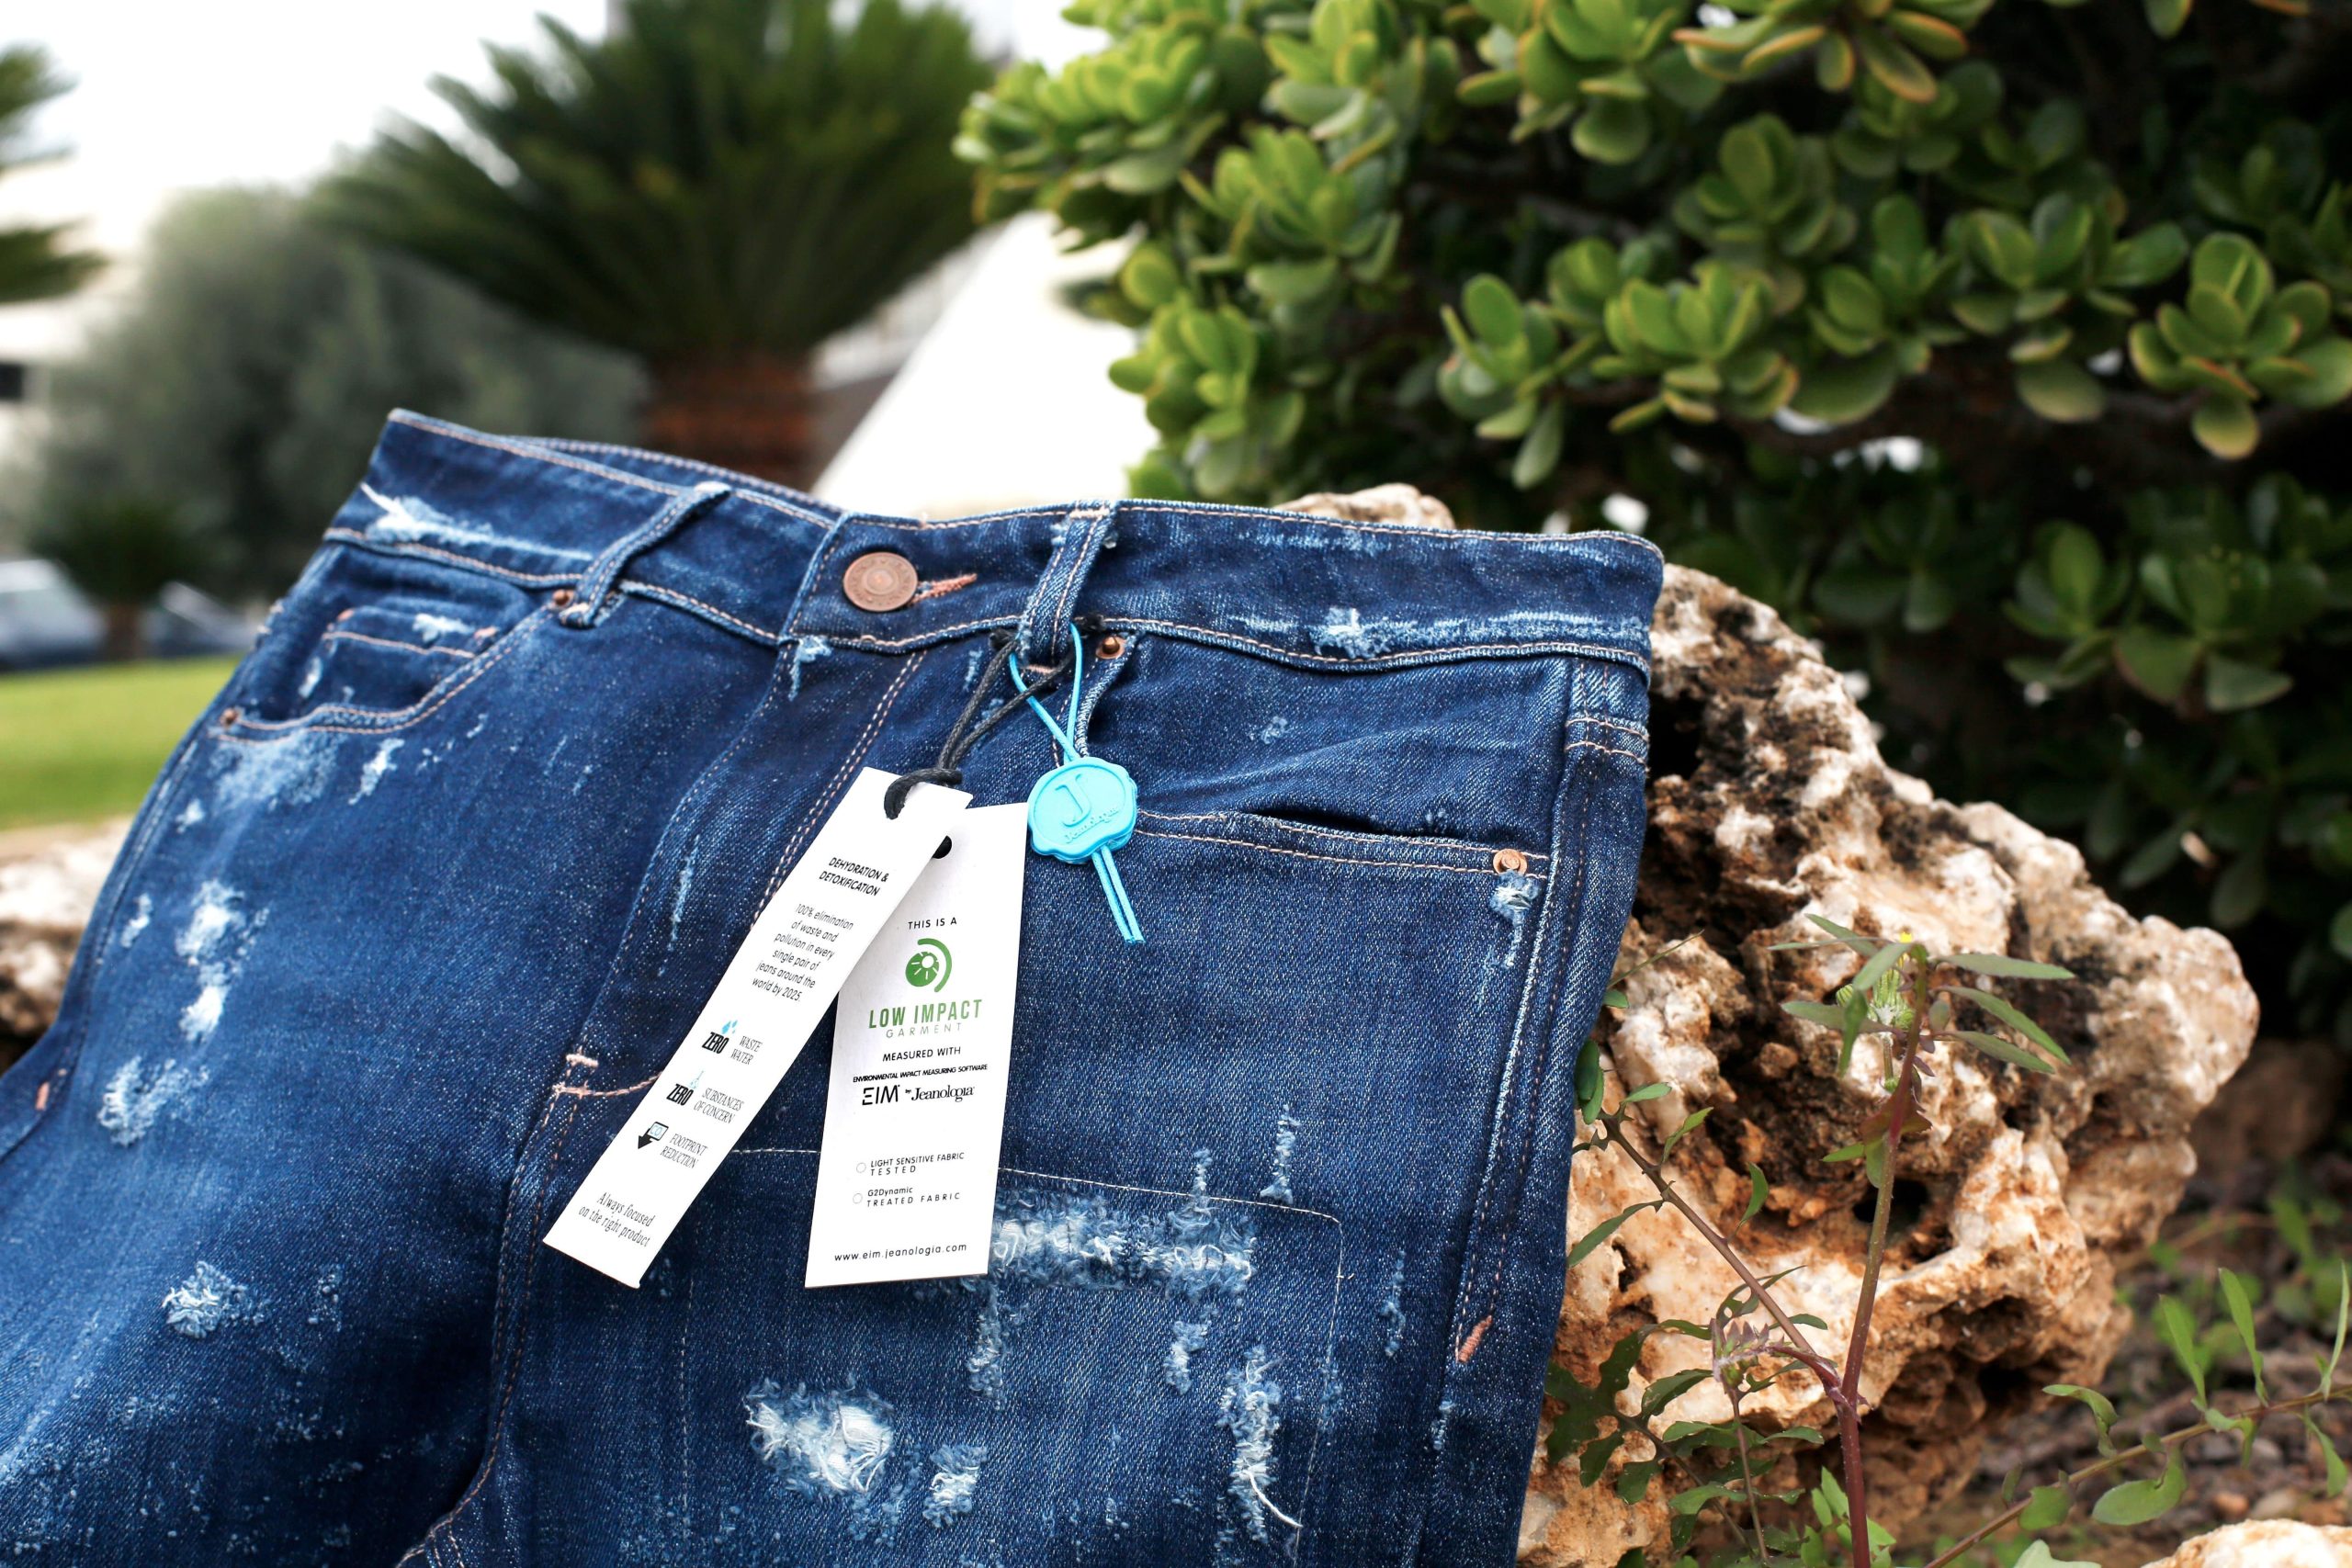 Jeanologia reduces water consumption in garment manufacturingAs part of Jeanologia&#039;s MissionZero project, the Spanish company aims to eliminate ...